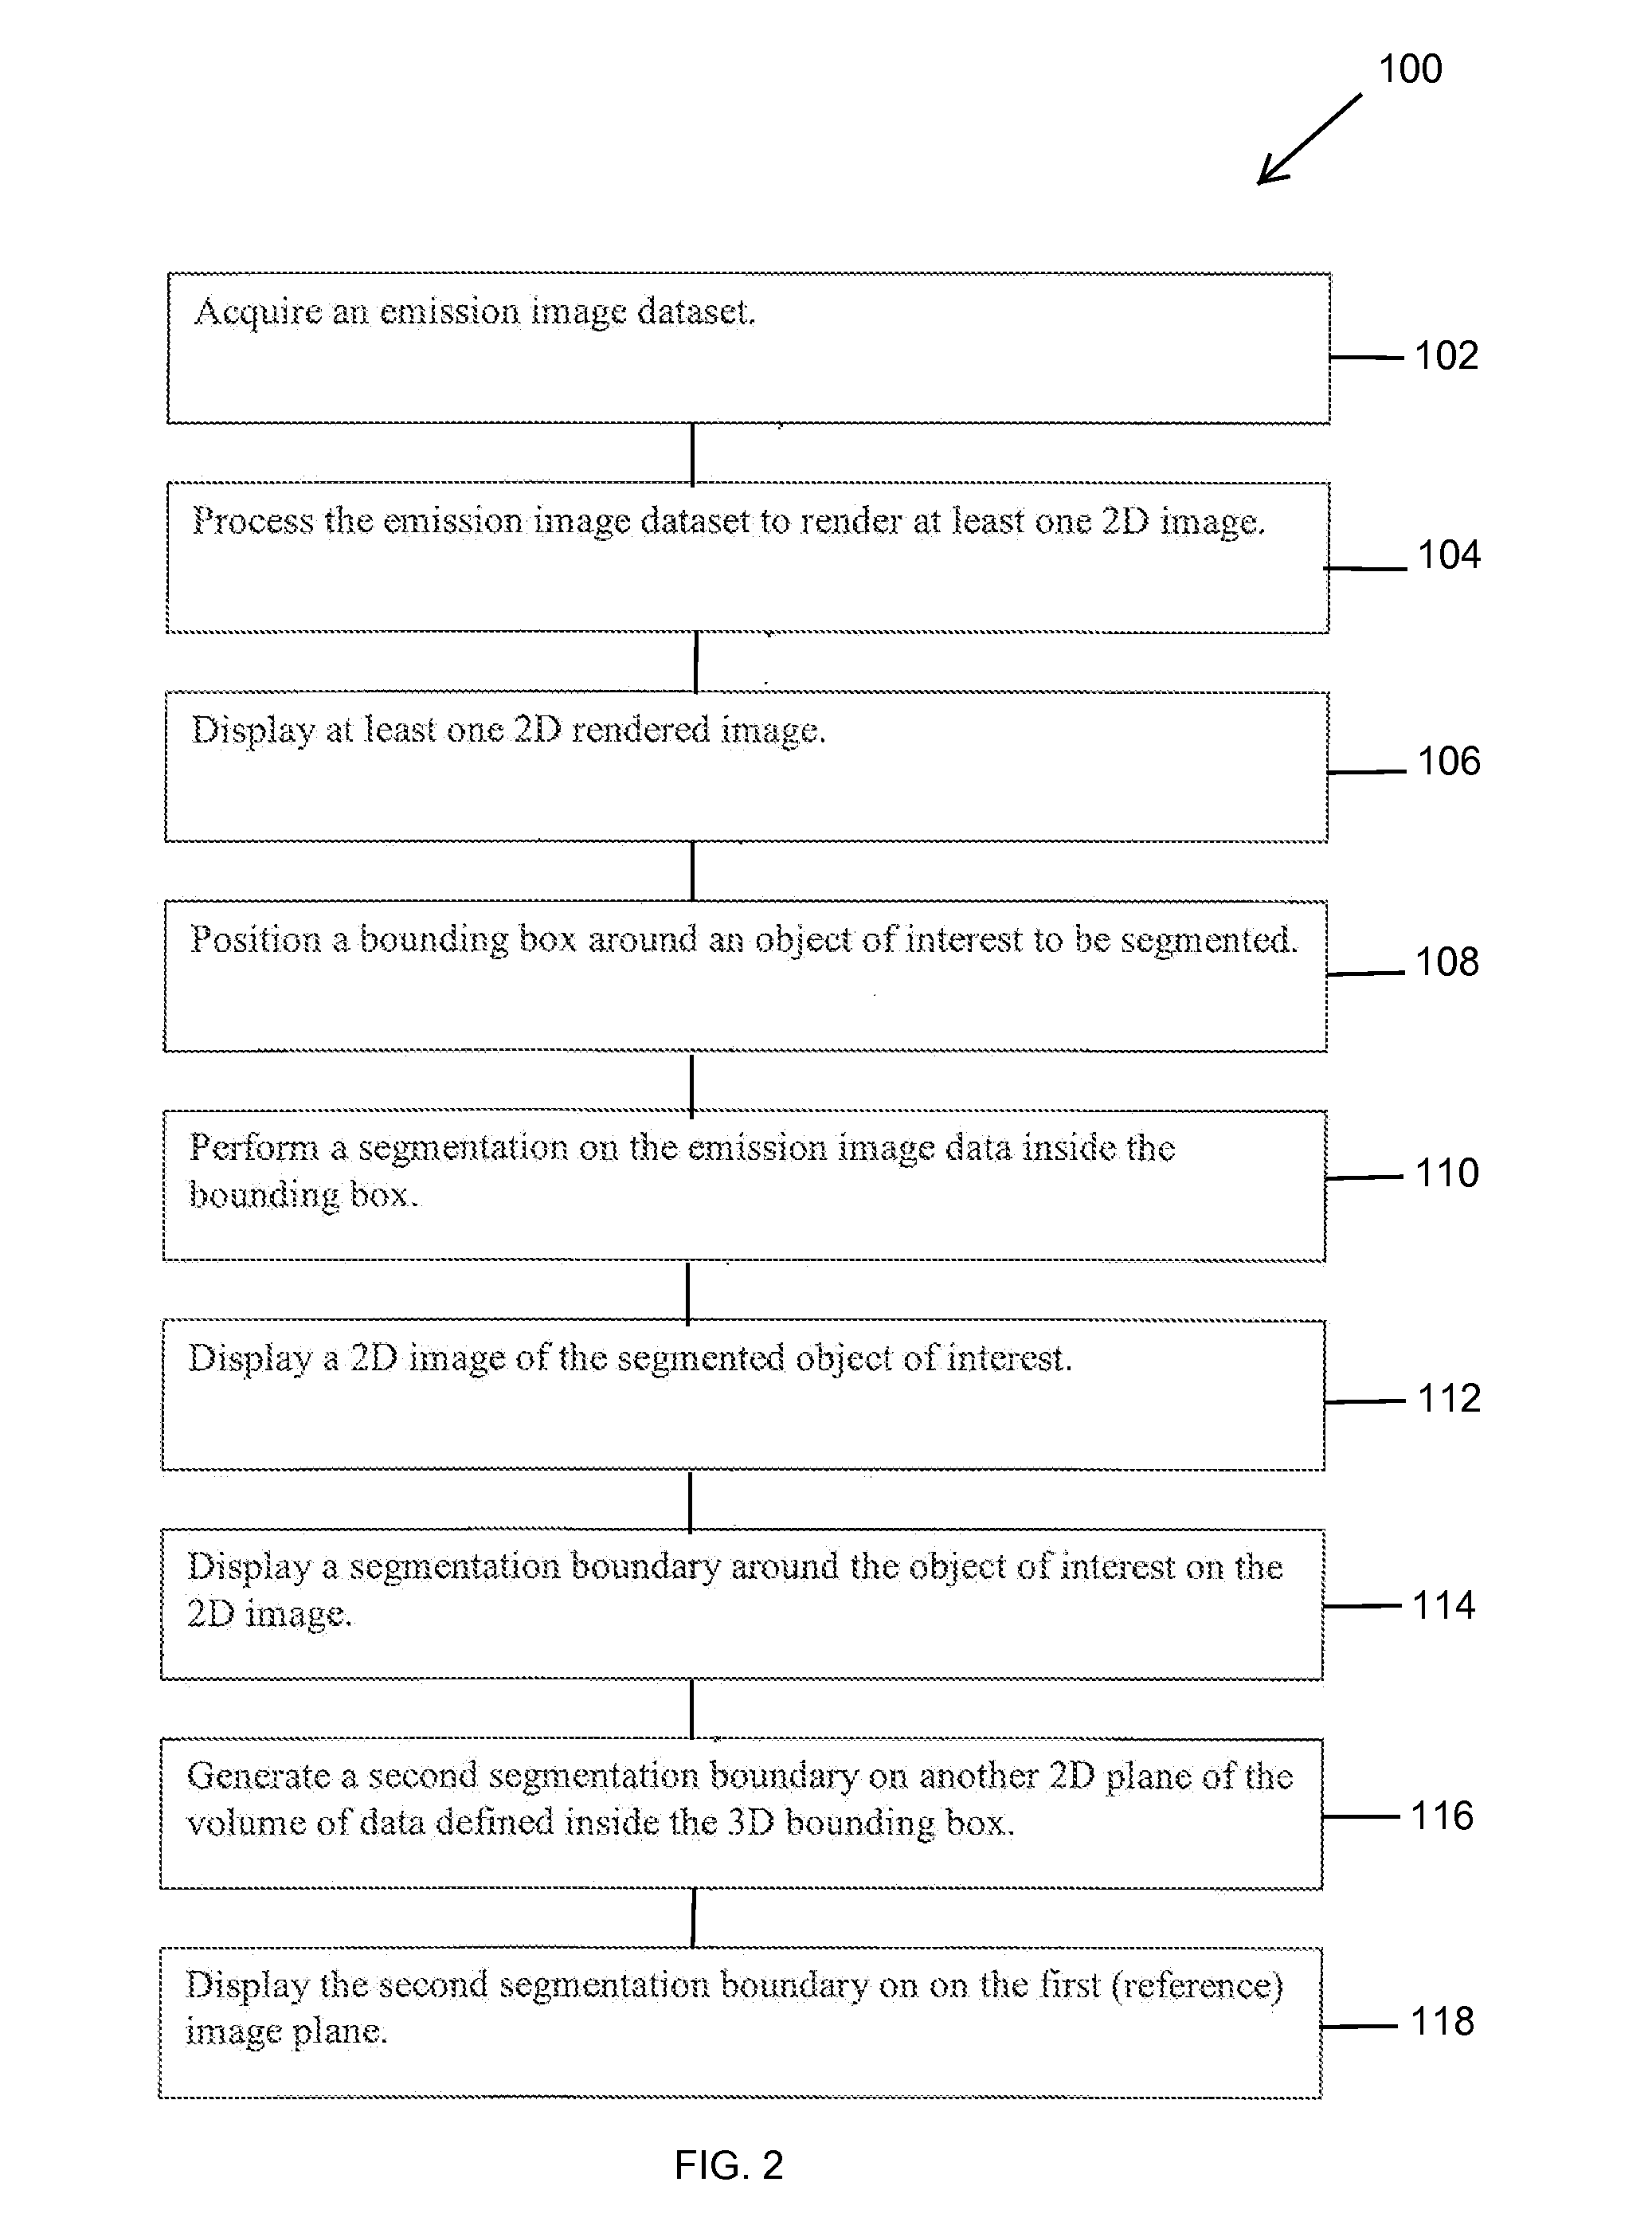 Methods and system for displaying segmented images